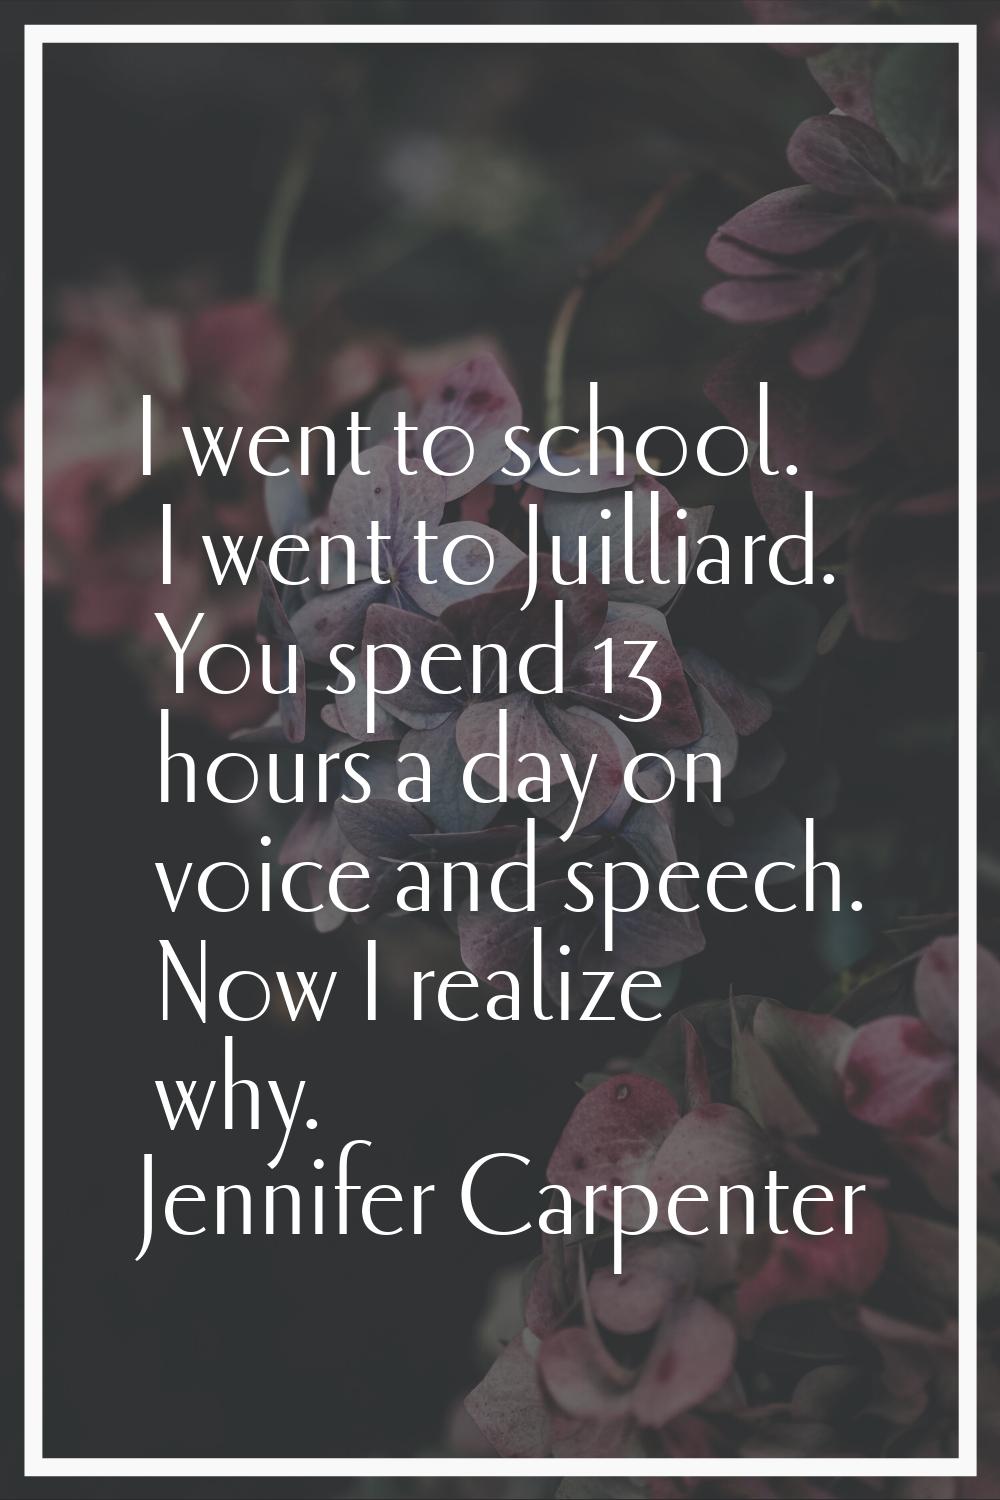 I went to school. I went to Juilliard. You spend 13 hours a day on voice and speech. Now I realize 